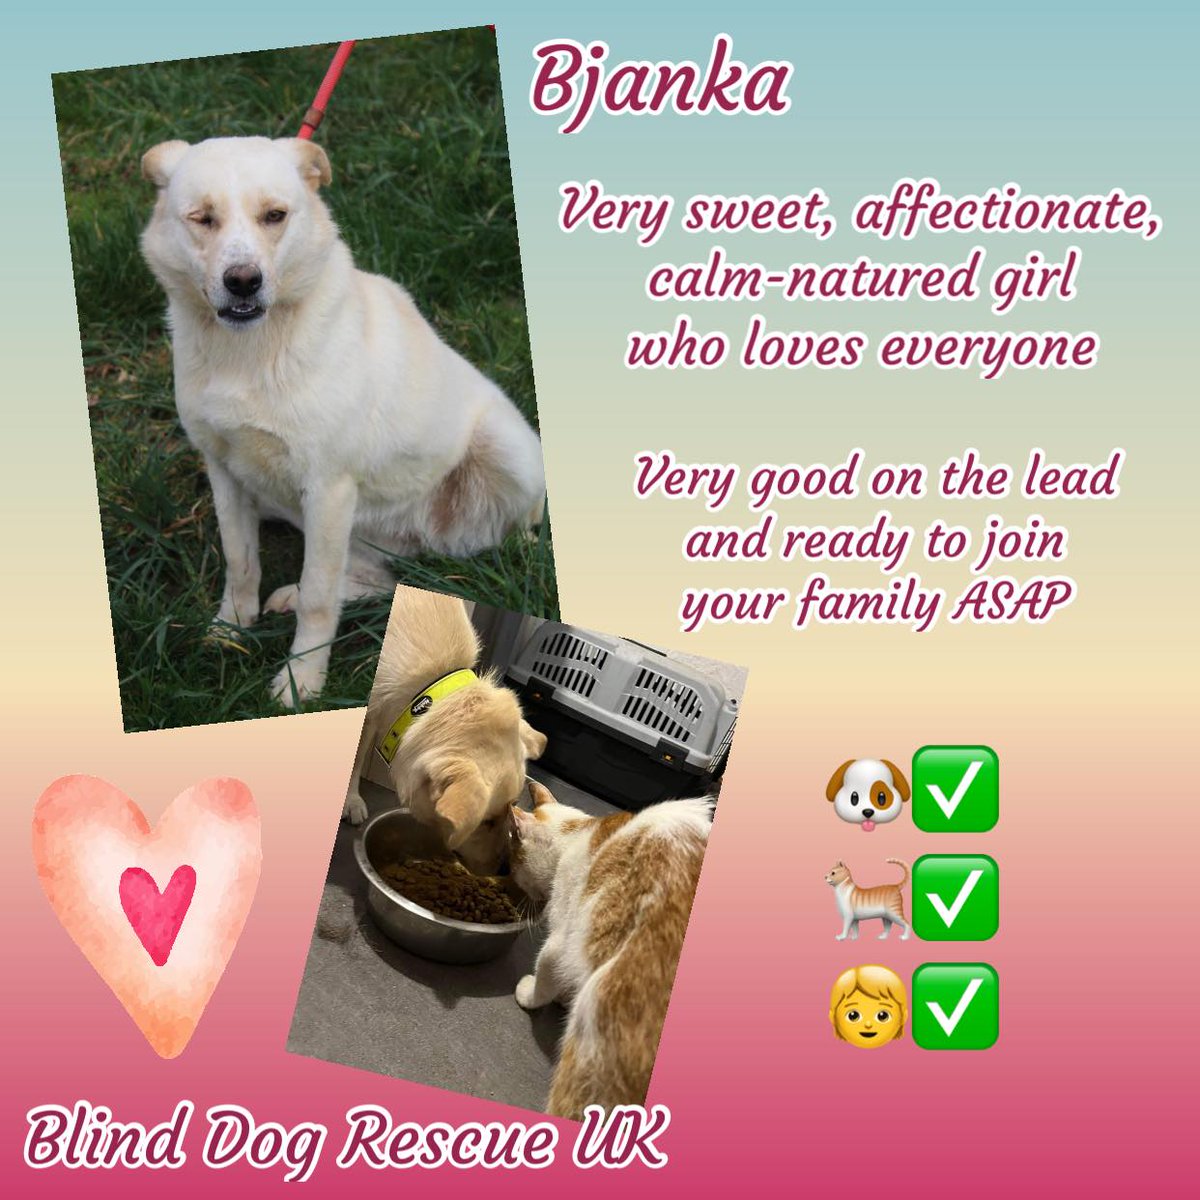 #rehomehour BJANKA is around 1yo & partially sighted due to one of her eyes being removed. She has a very calm nature, is affectionate, very sweet, & loves everyone. She is good with cats & other dogs, & also good on a lead. Bjanka is looking for a home where she can be part of